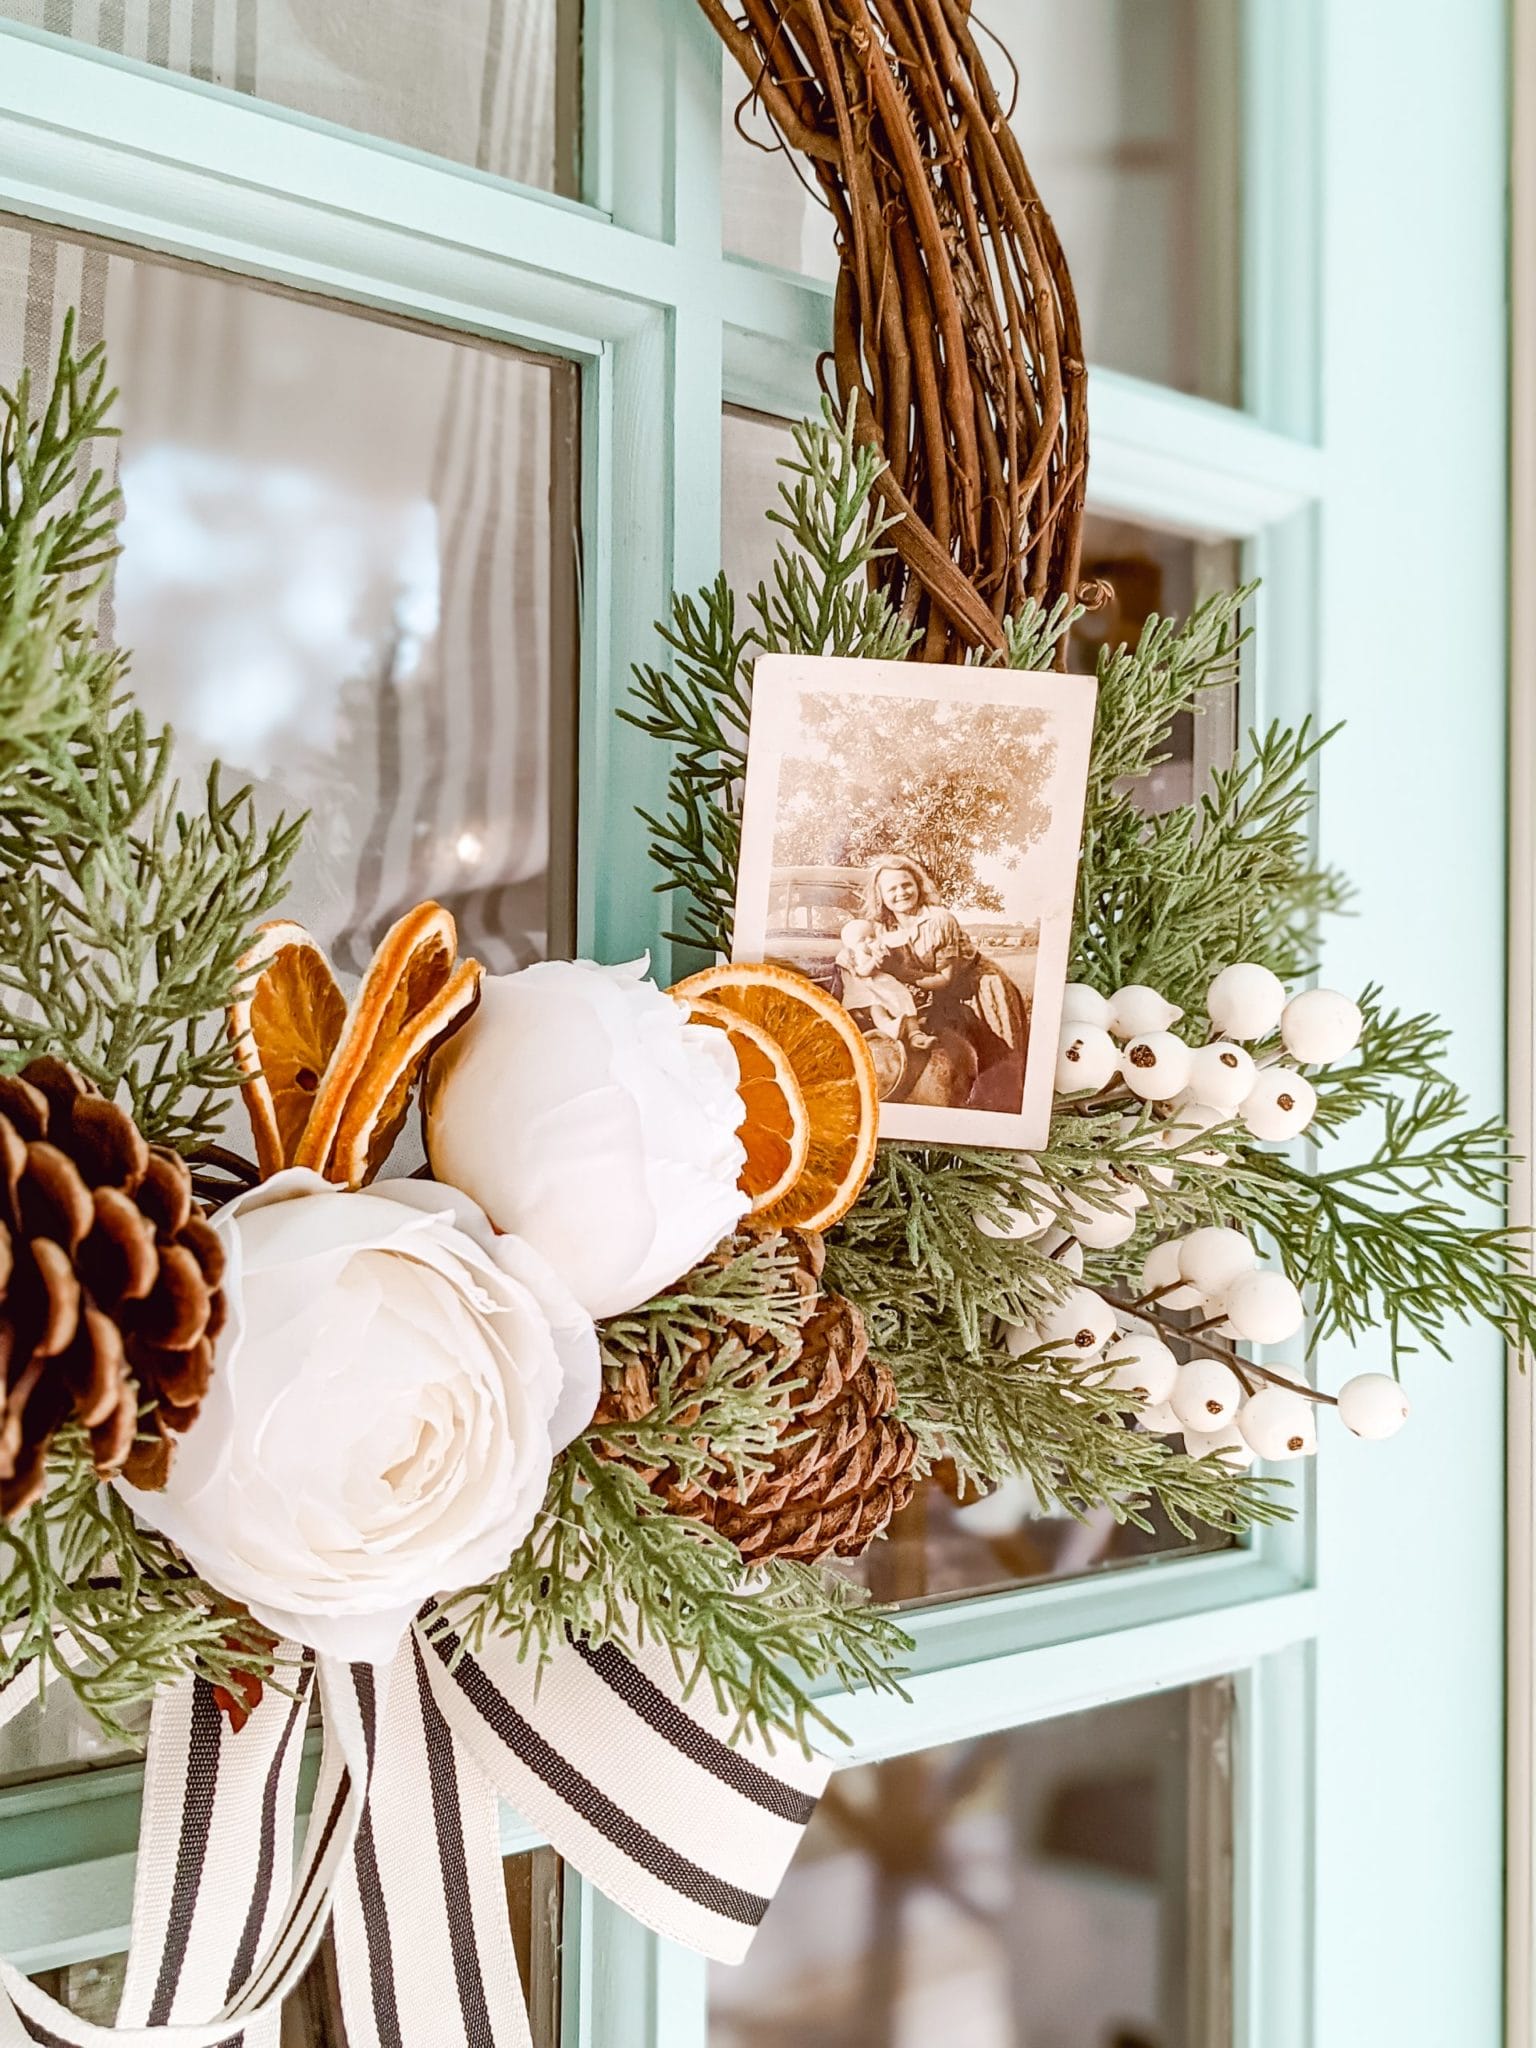 Cozy Classic Christmas Wreaths for The Front Porch